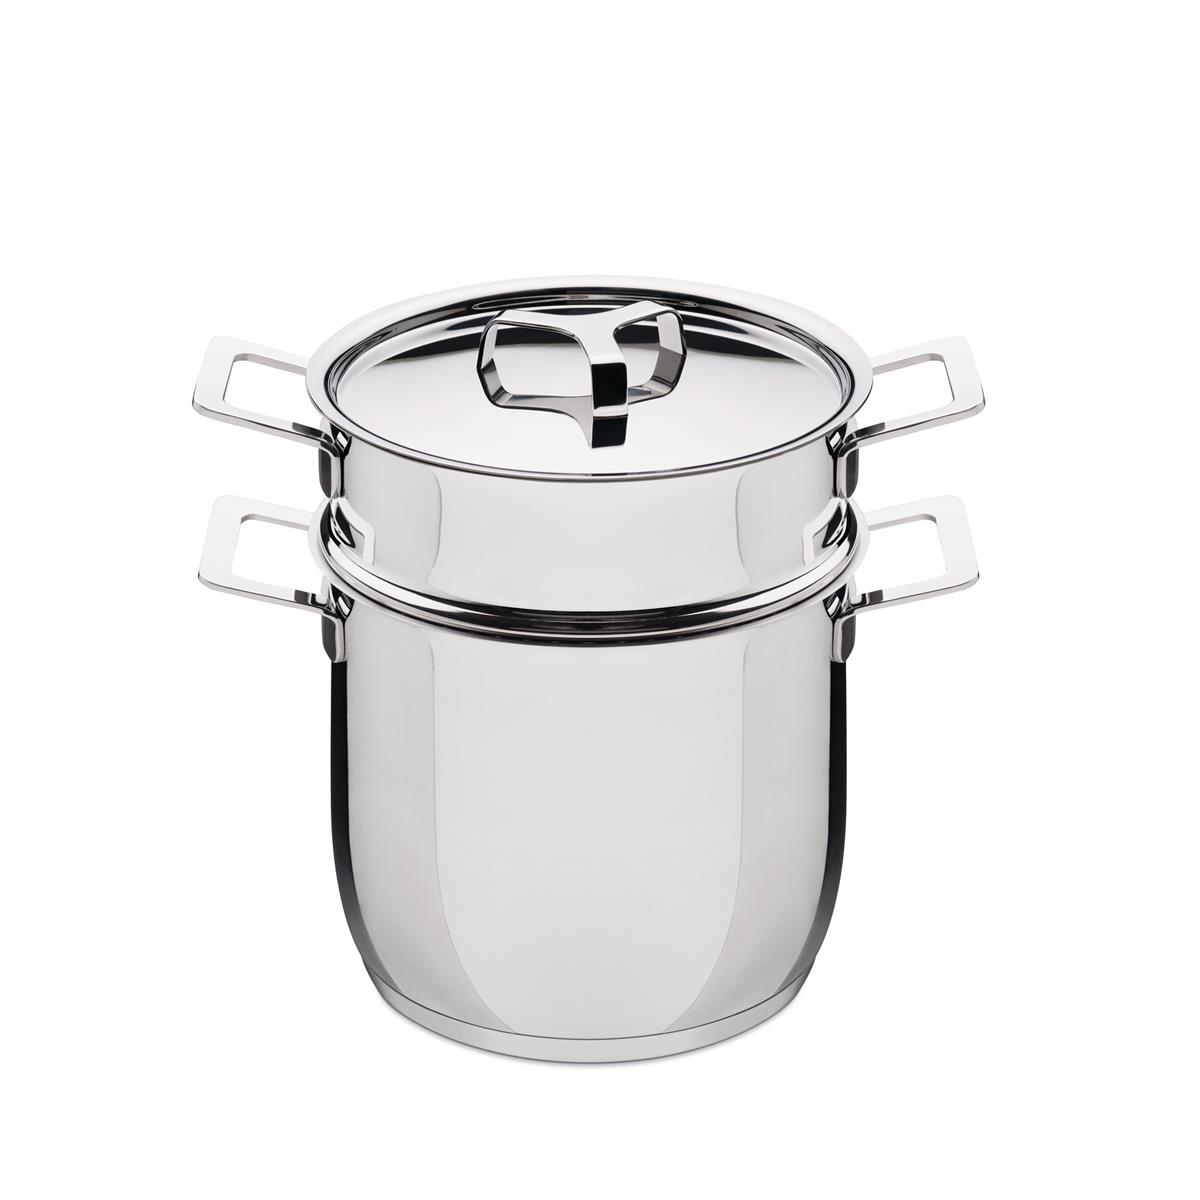 Alessi-Mami Casserole with long handle in 18/10 stainless steel suitable for induction